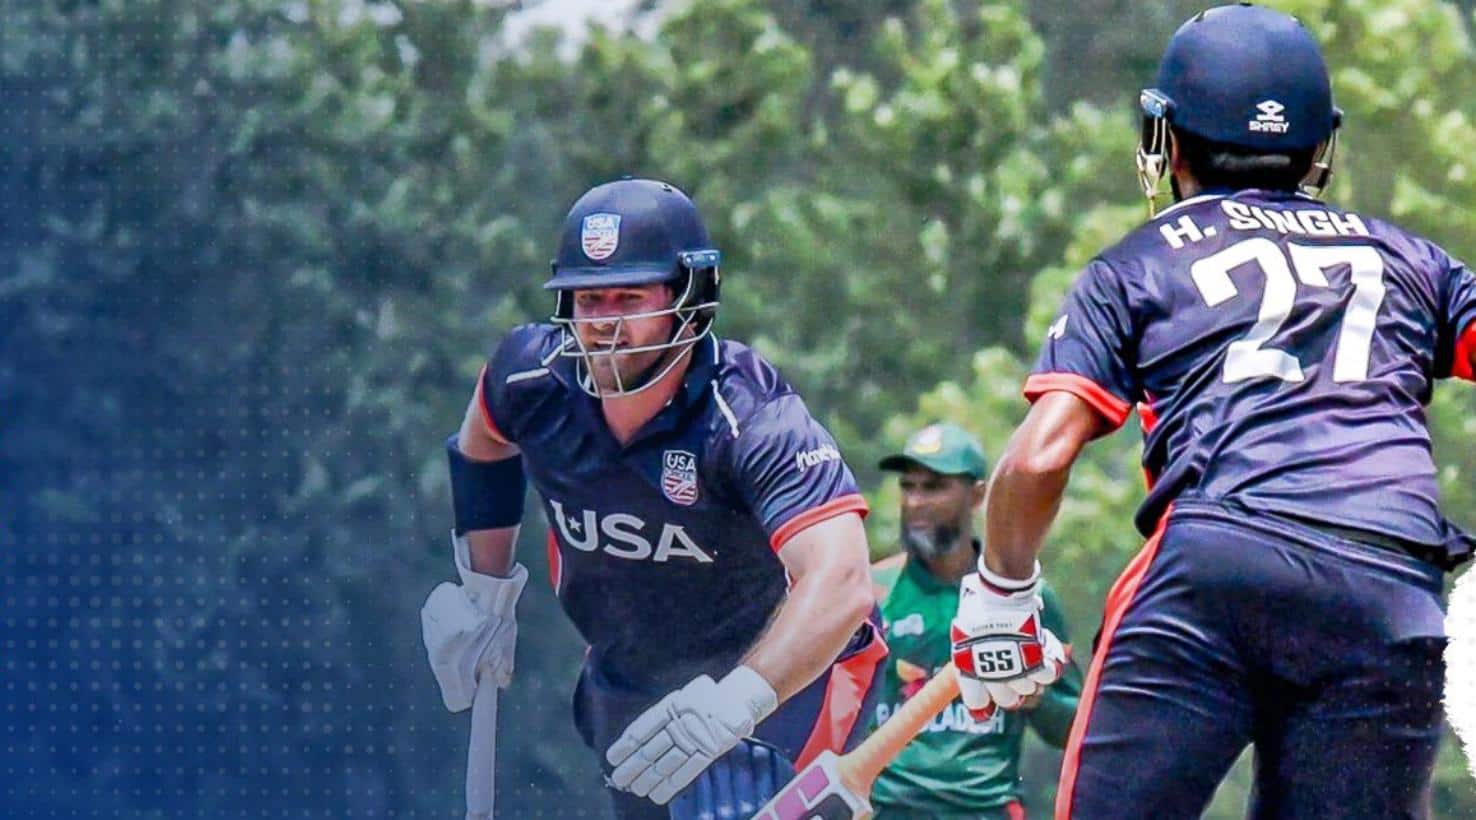 ‘Bangladesh Cricket, Please Hide’: Twitter On Fire As USA Produces Upset Vs BAN In T20I